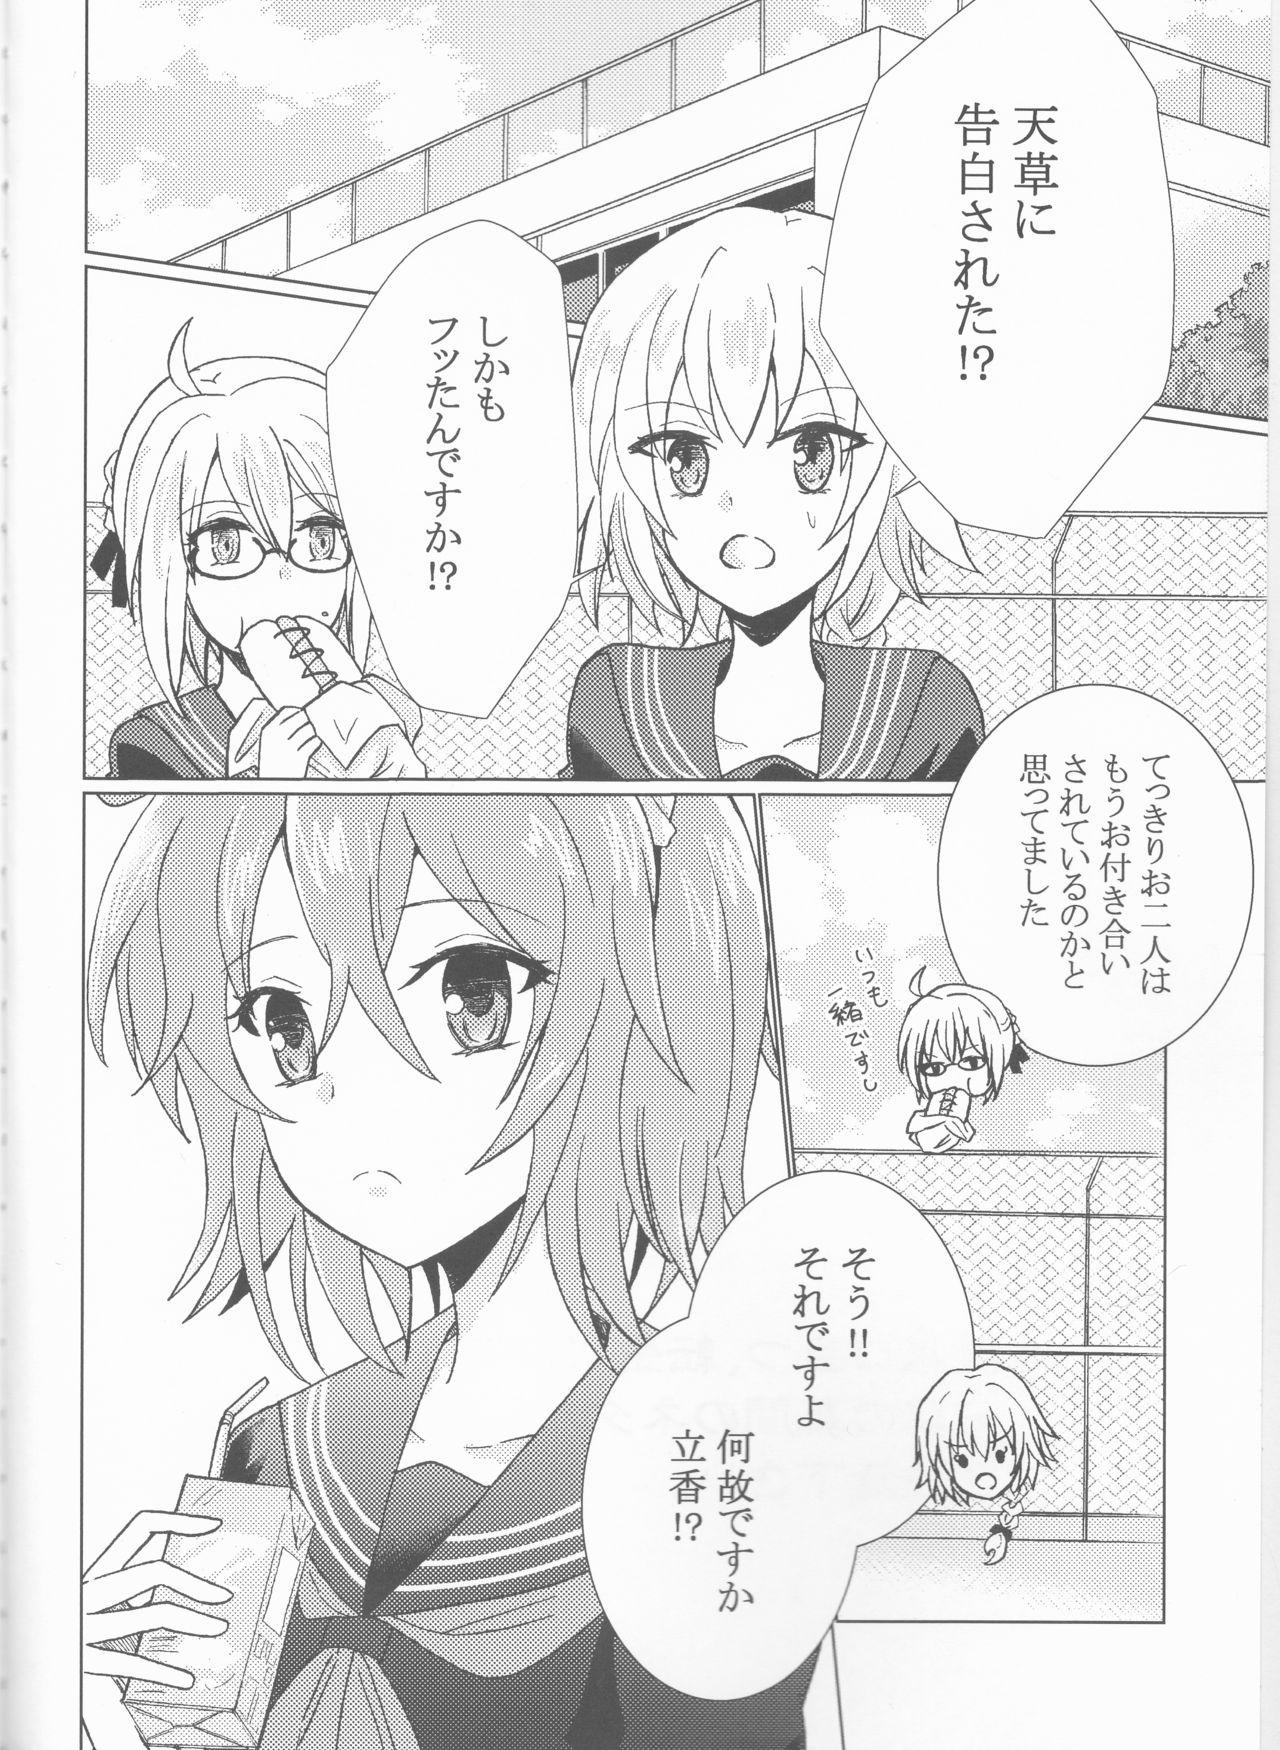 Family Roleplay Kiseki no Kaisuu - Fate grand order Gay Blondhair - Page 3